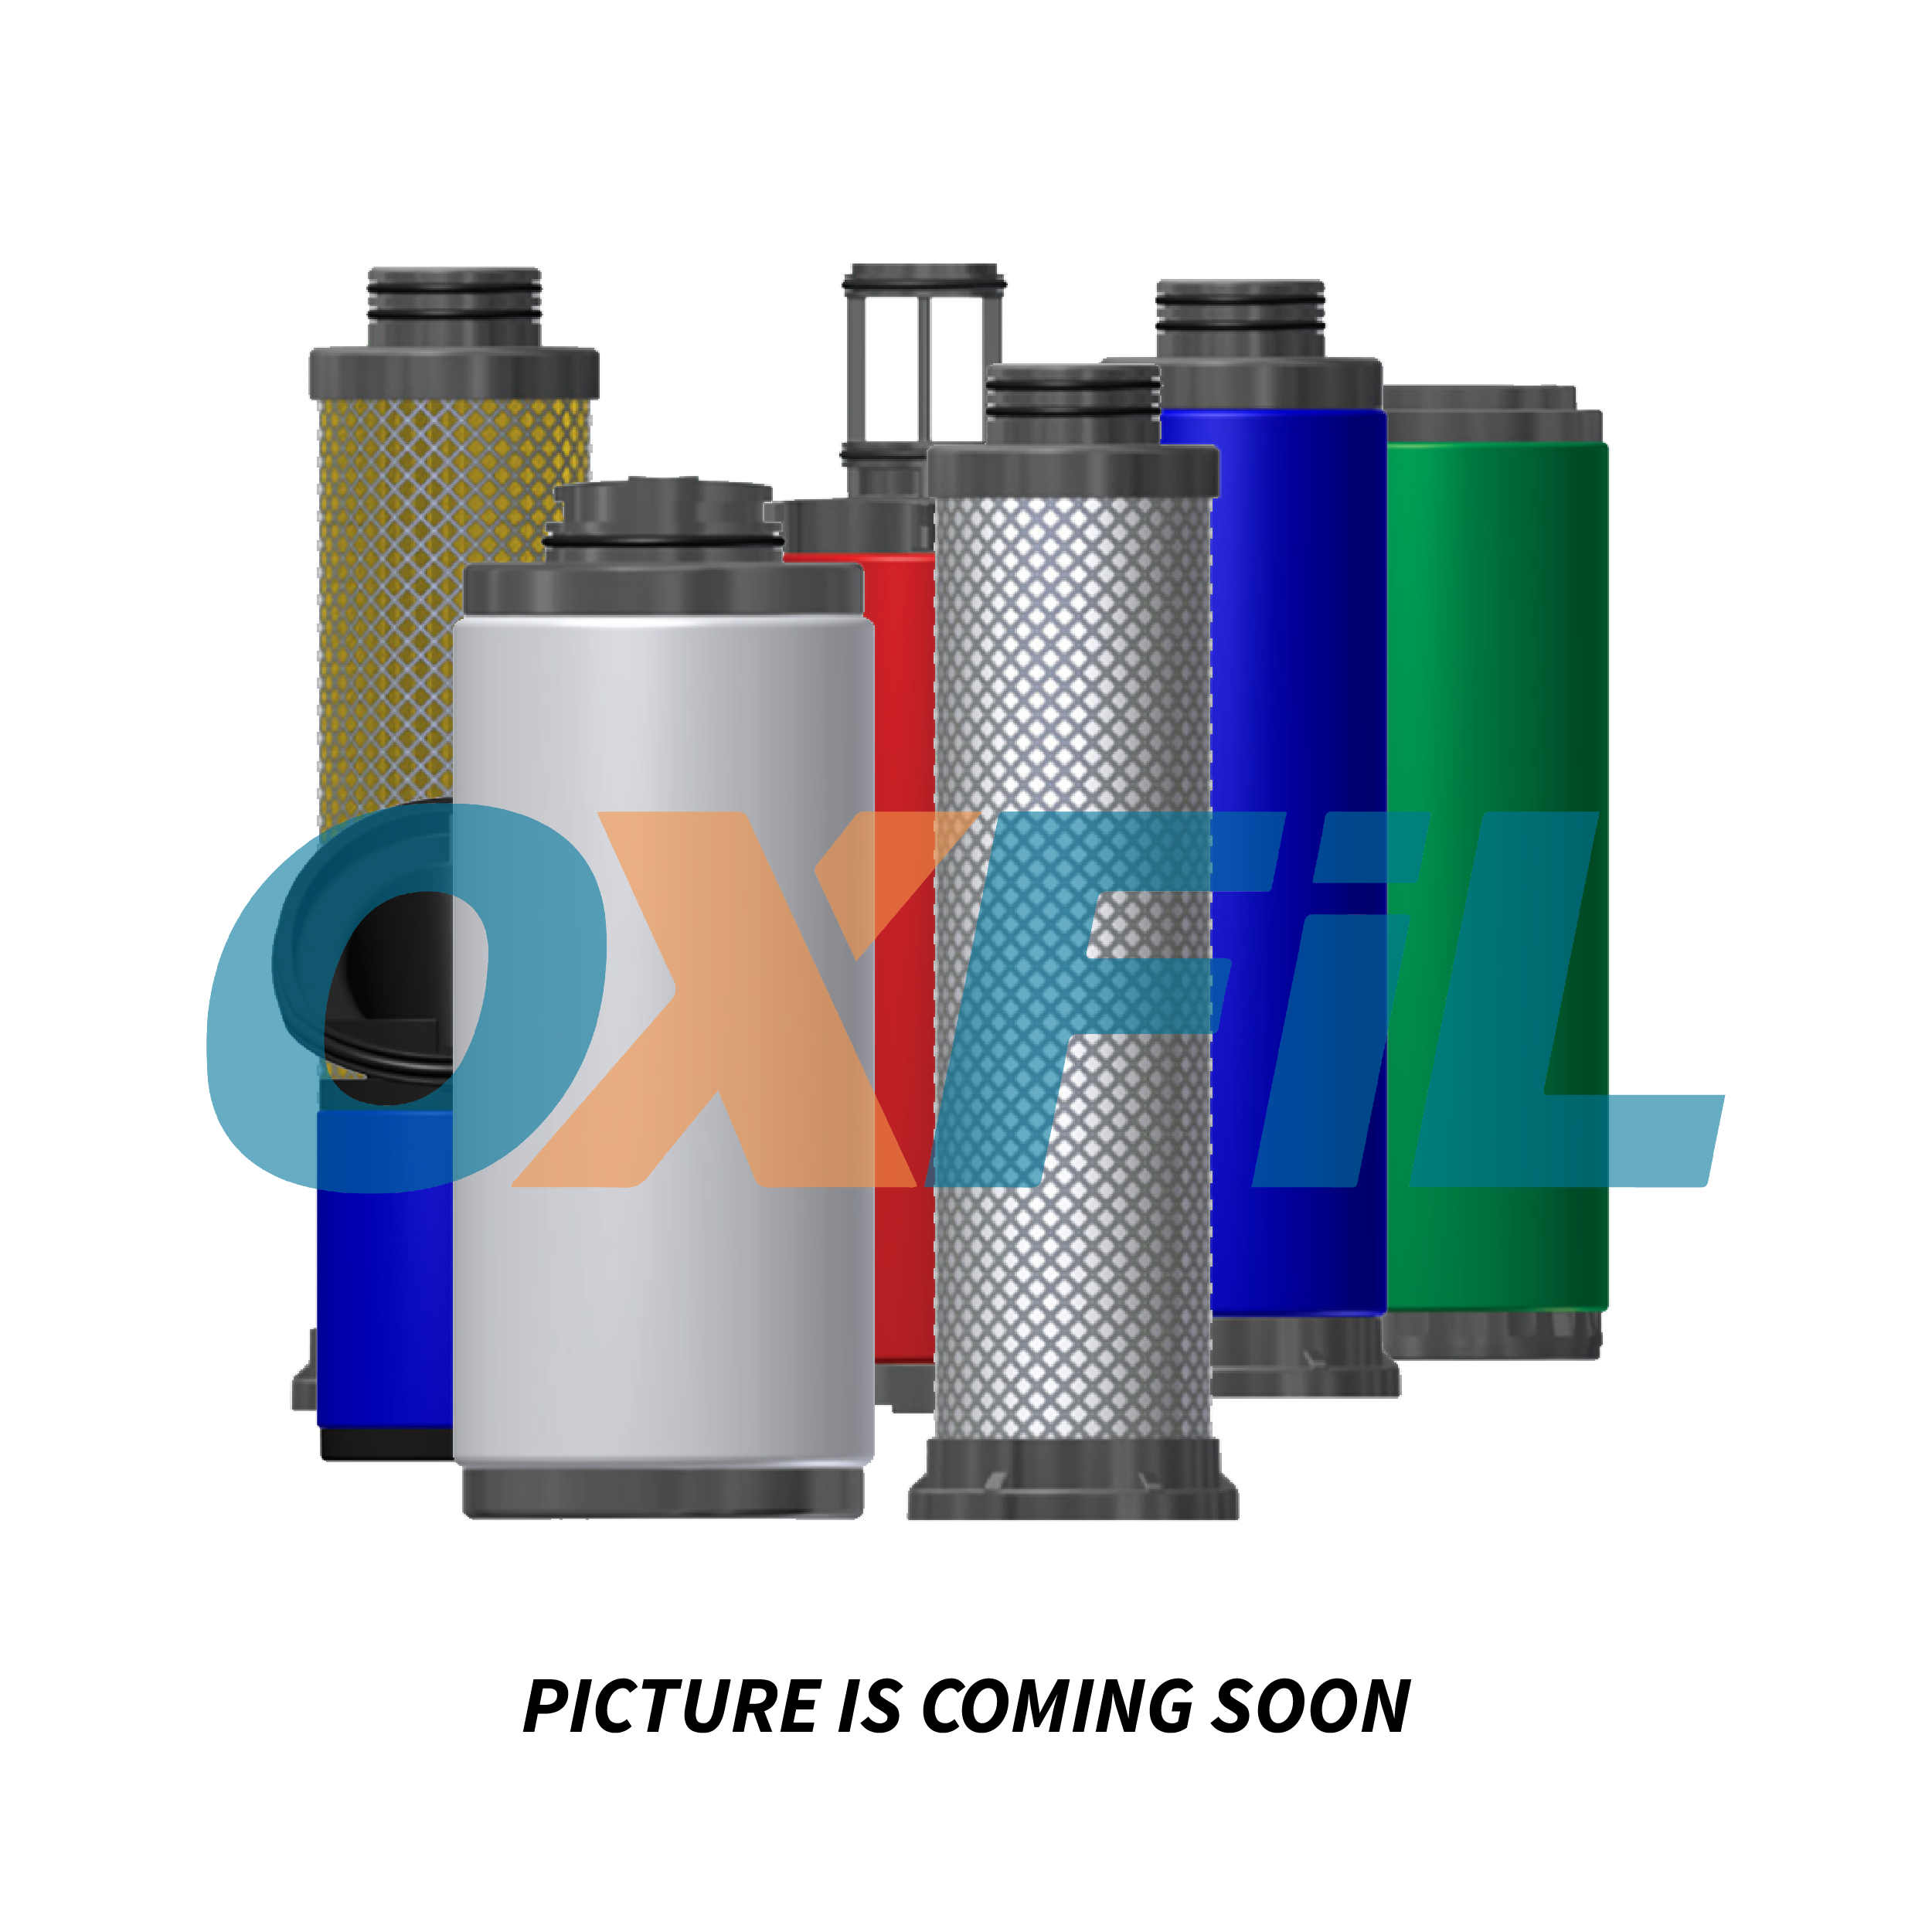 Related product IF.4245 - In-line Filter